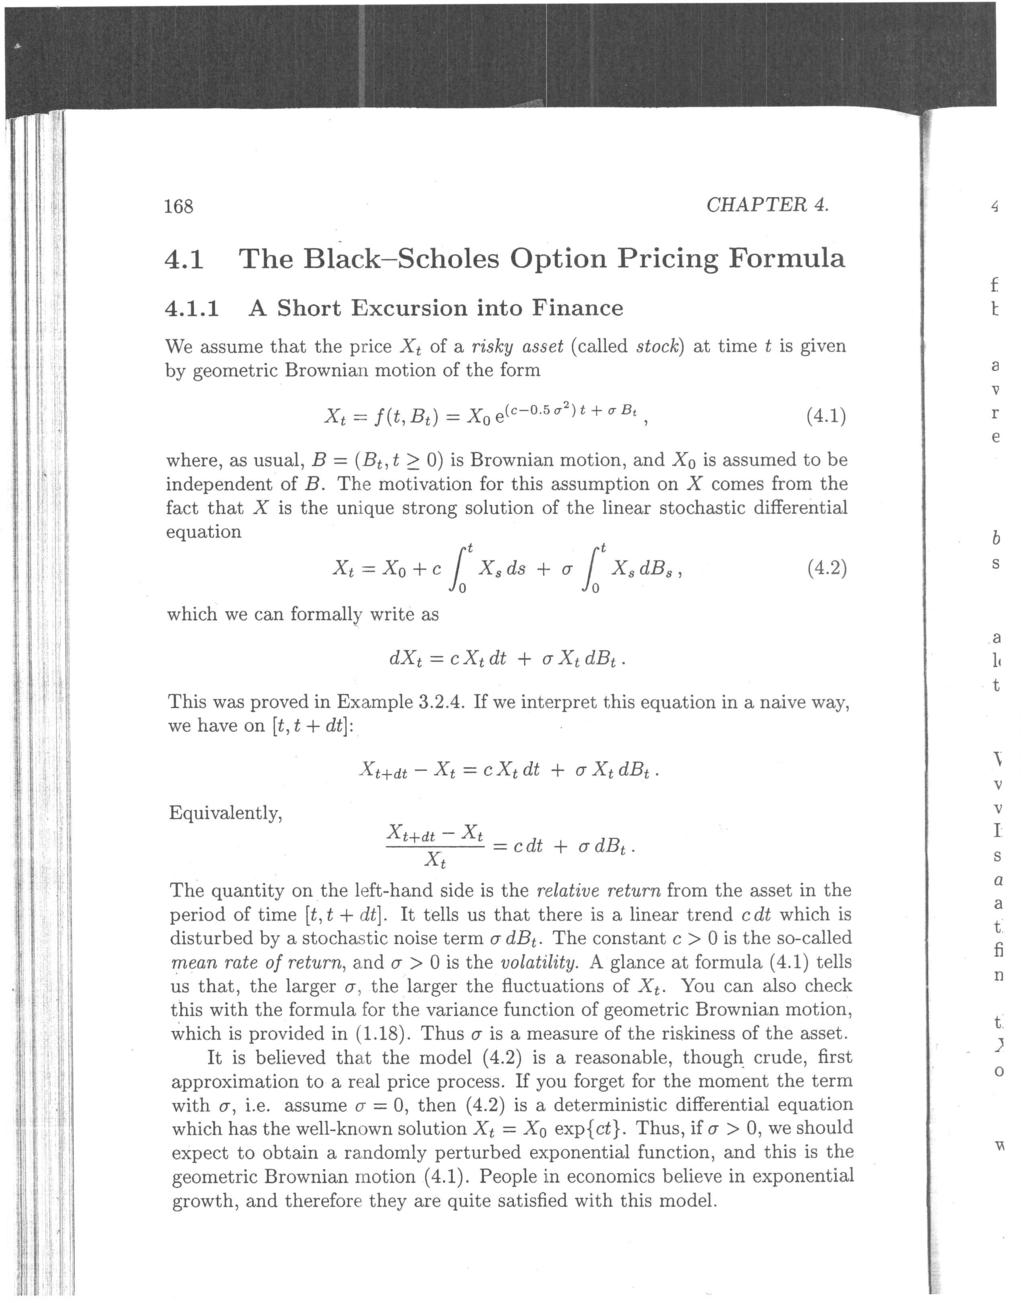 4.1 The Black-Scholes Option Pricing Formula We assume that the price X t of a risky asset (called stock) at time t is given by geometric Brownian motion of the form where, as usual, B = (Bt, t 2: 0)